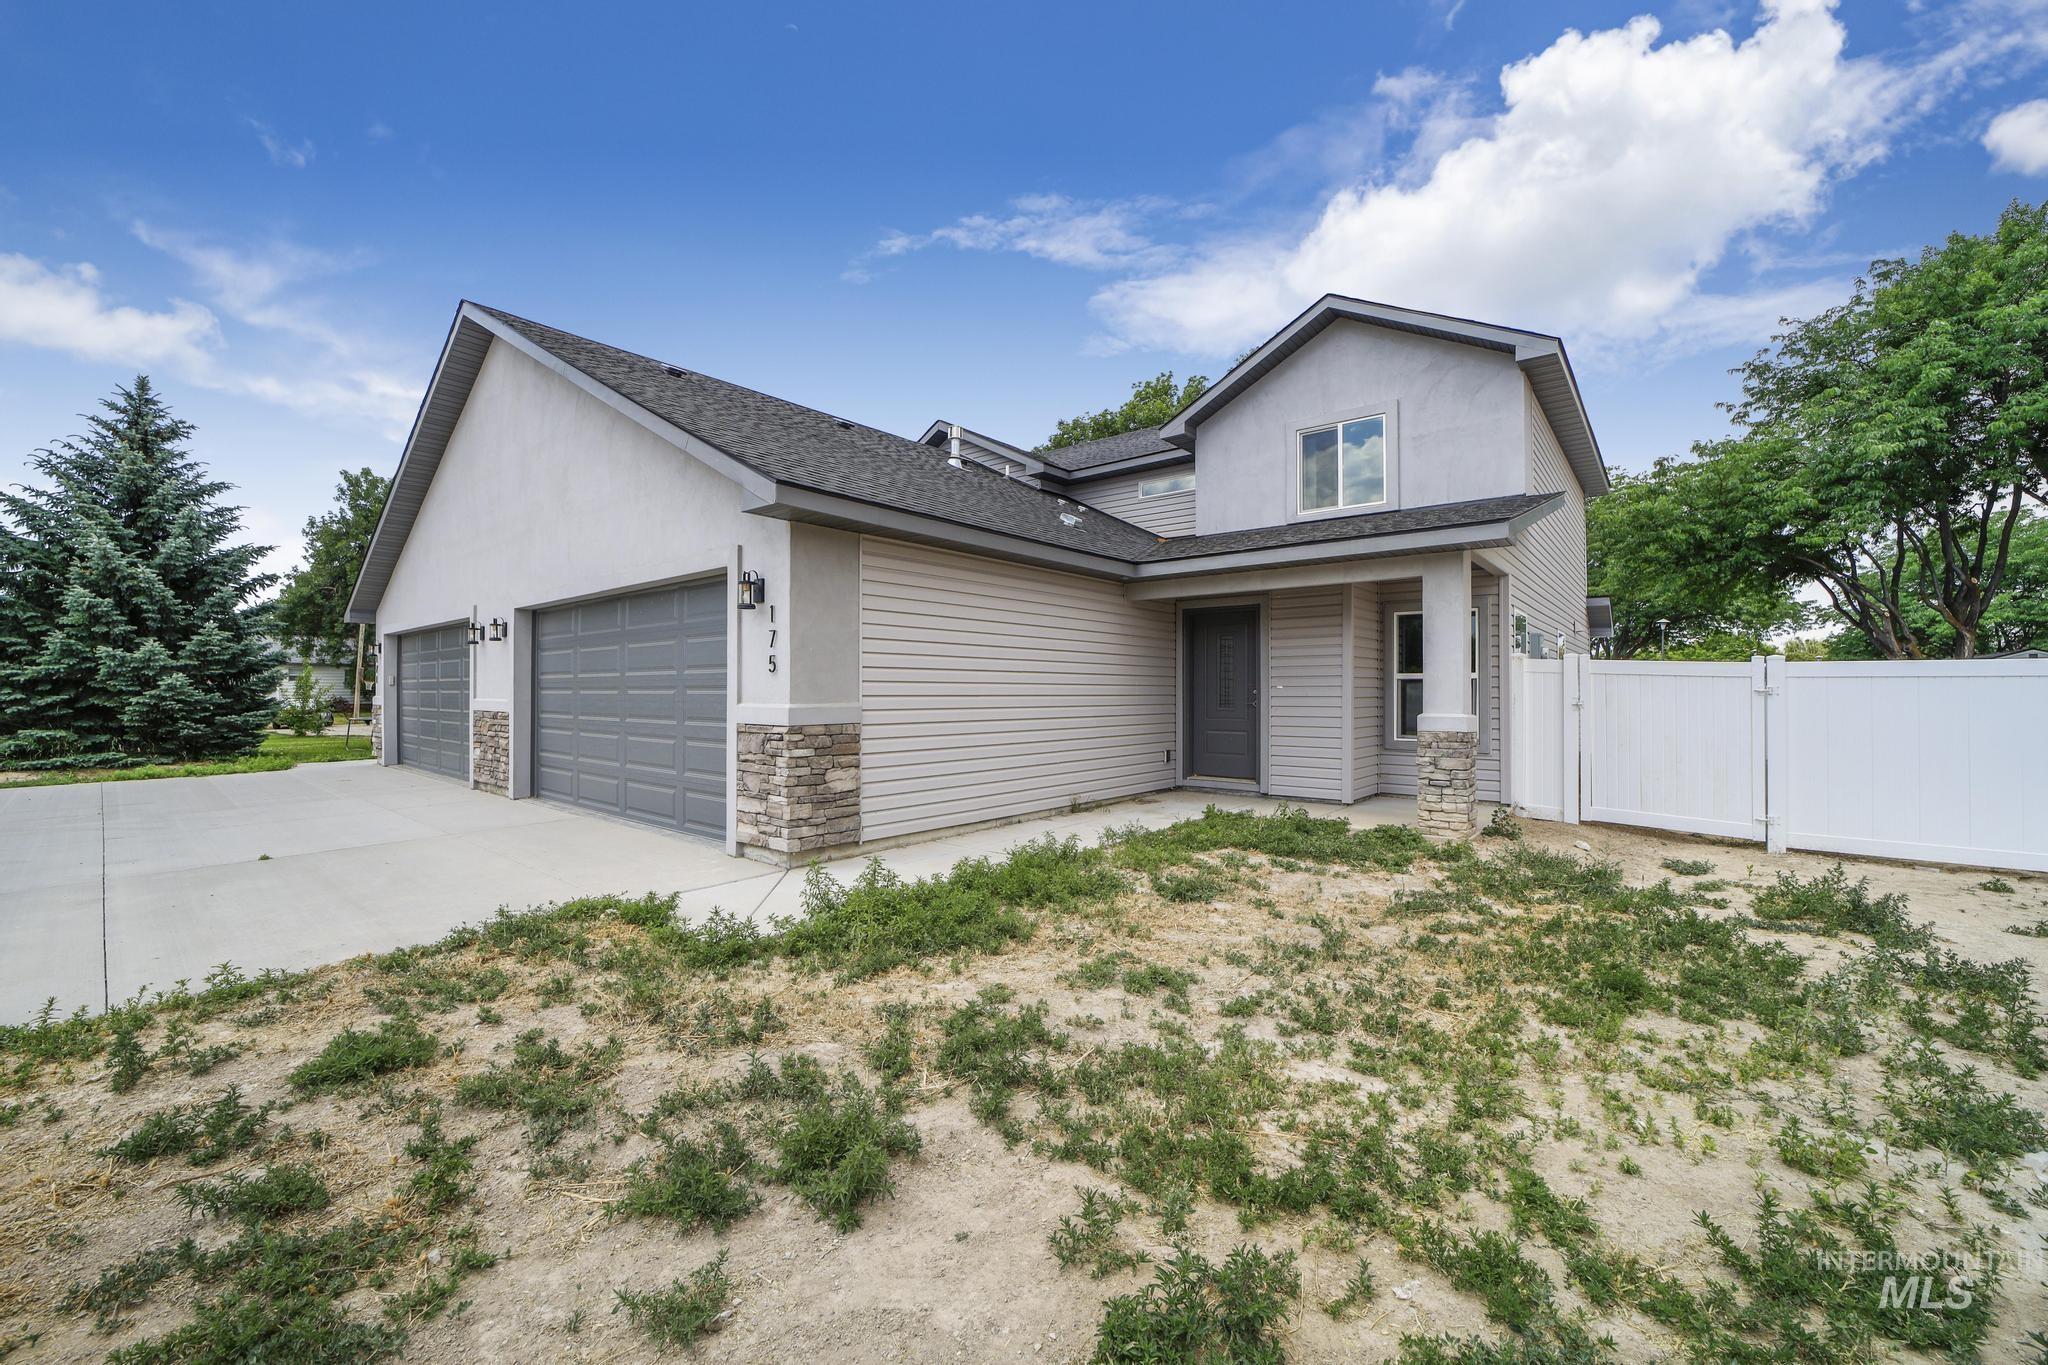 175 Woody Way, Jerome, Idaho 83338, 4 Bedrooms, 2.5 Bathrooms, Residential For Sale, Price $385,000,MLS 98883428